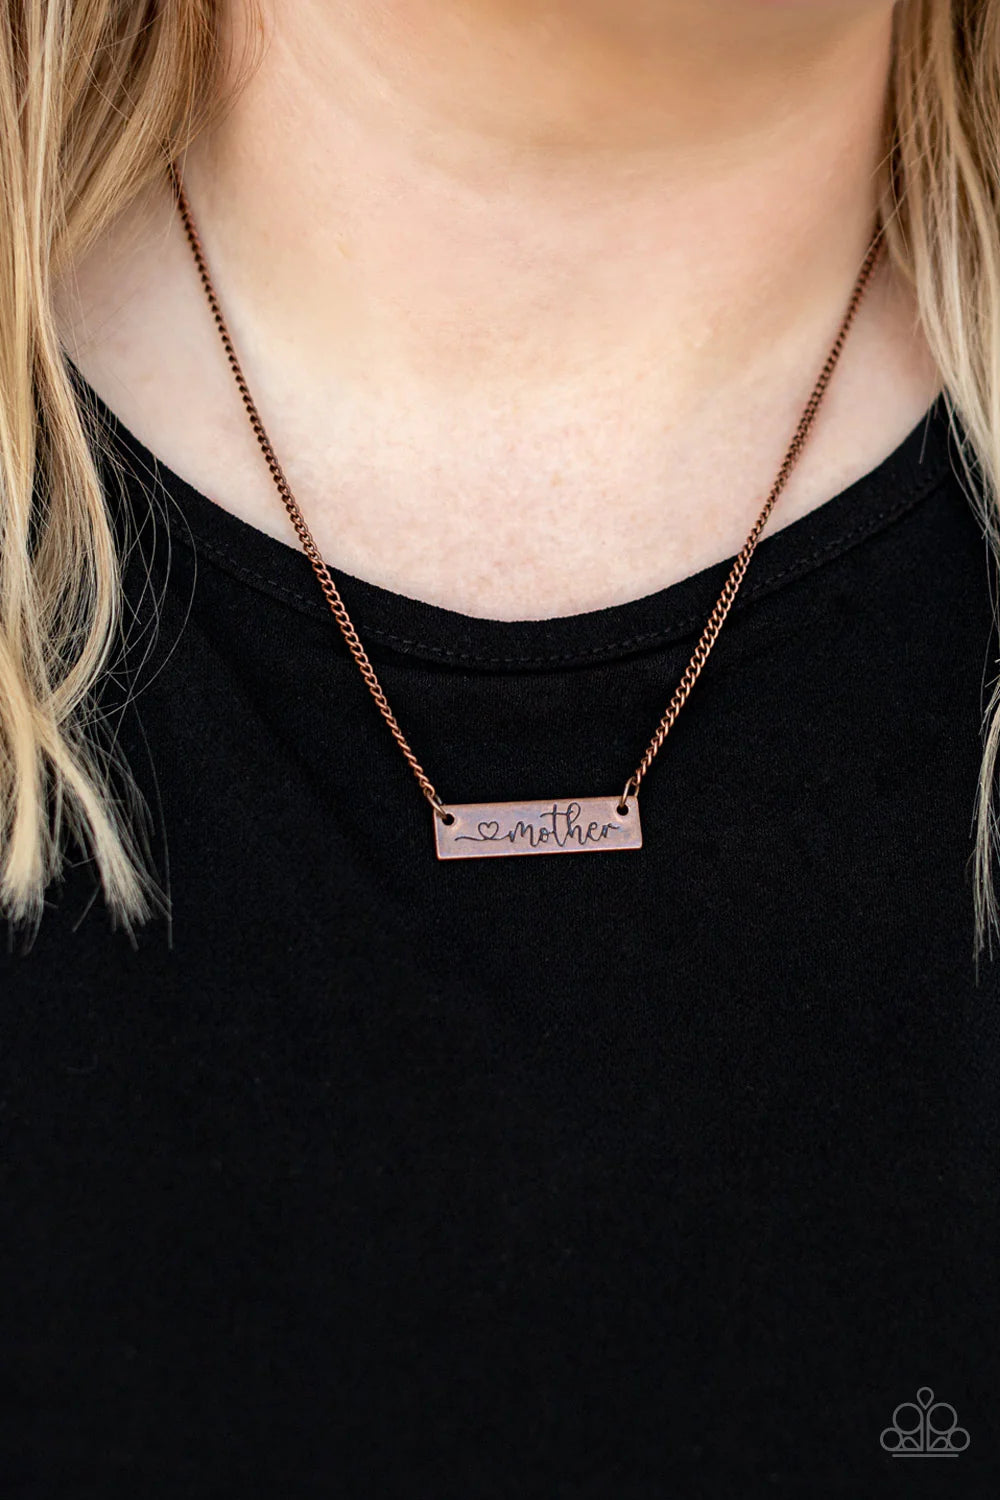 Paparazzi Accessories Joy of Motherhood - Copper Stamped in a heart and the word, "Mother," an antiqued copper plate is suspended by a classic copper chain below the collar, creating a whimsy sentimental pendant. Features an adjustable clasp closure. Sold